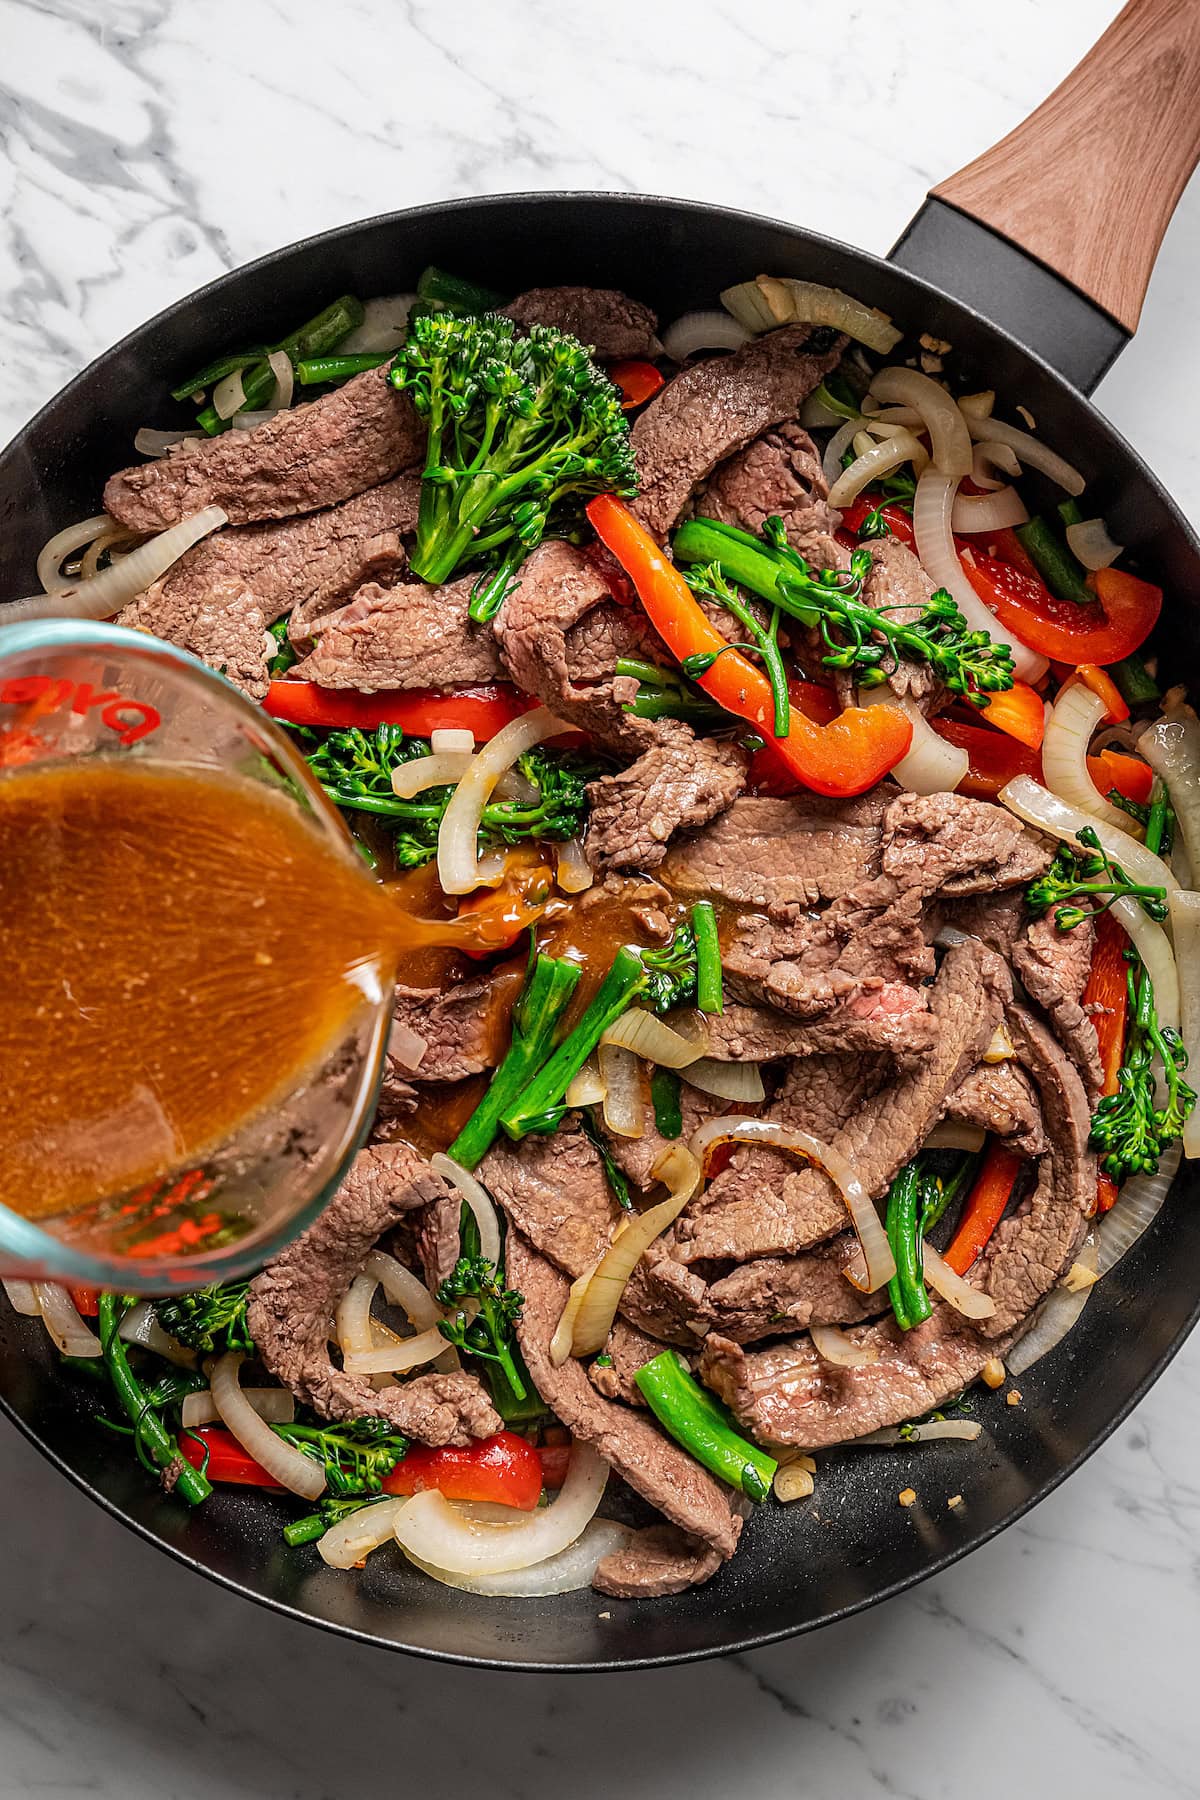 Stir fry sauce is poured over sauteed beef, red peppers, and broccolini in a skillet.